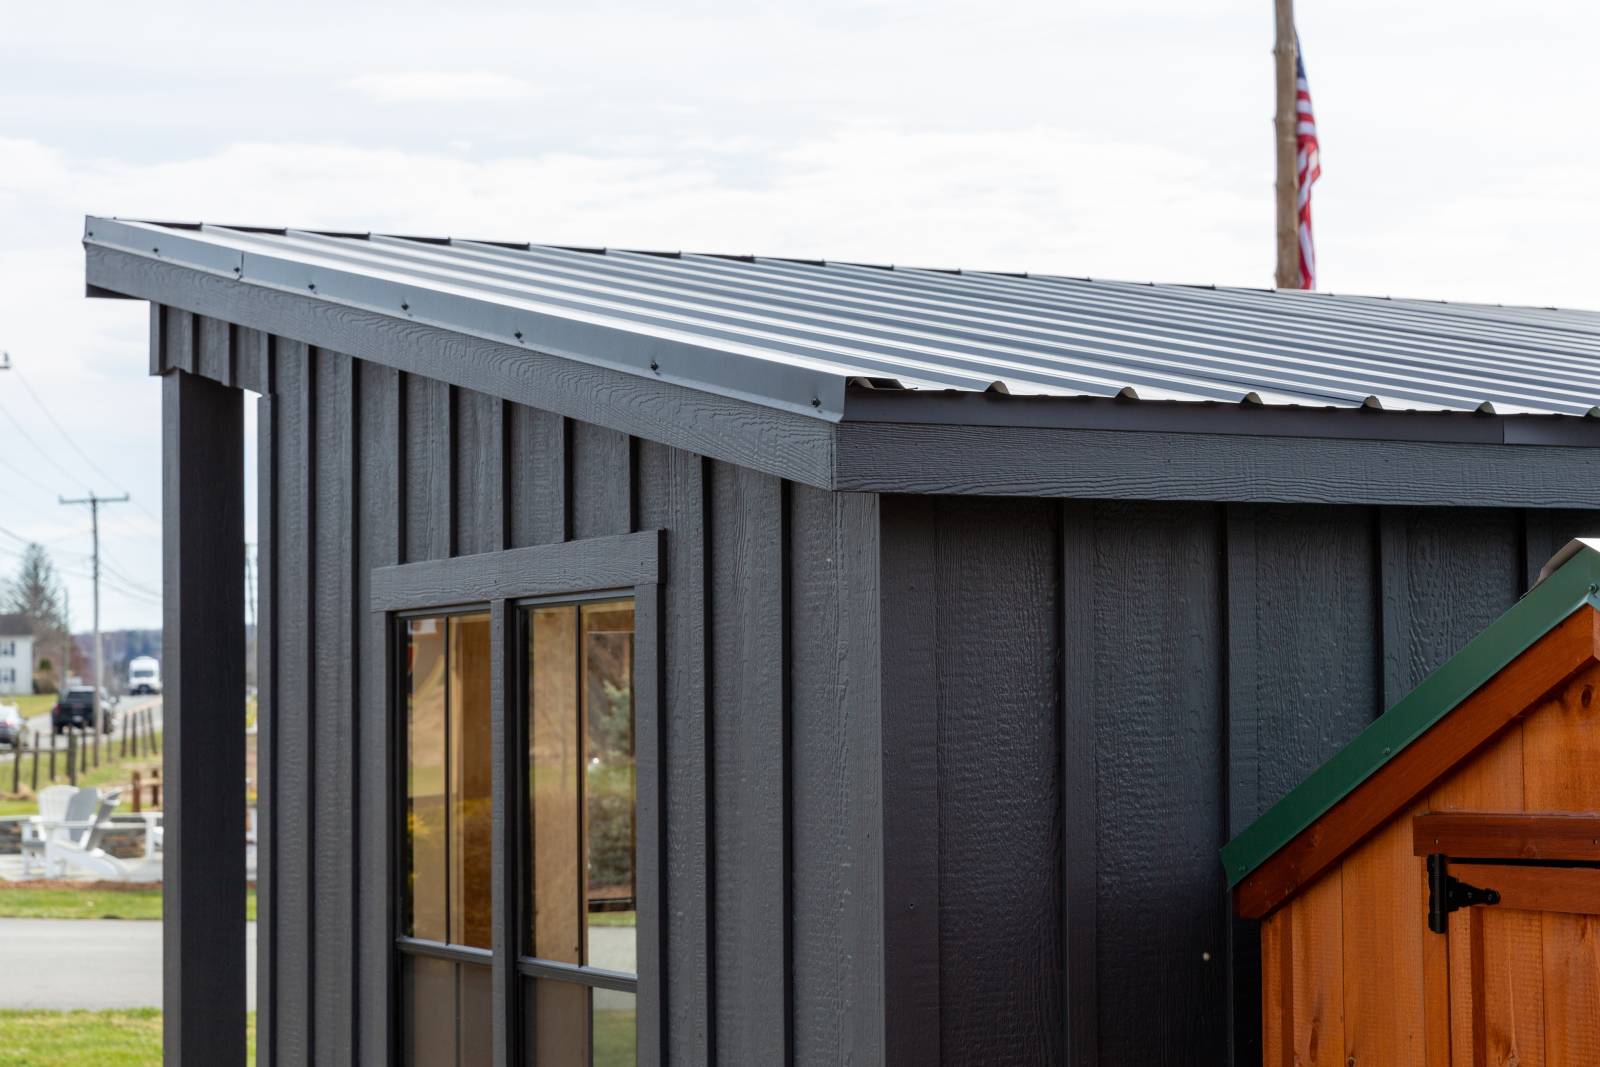 Angled Roof • Corrugated Metal Roofing • Board & Batten Siding